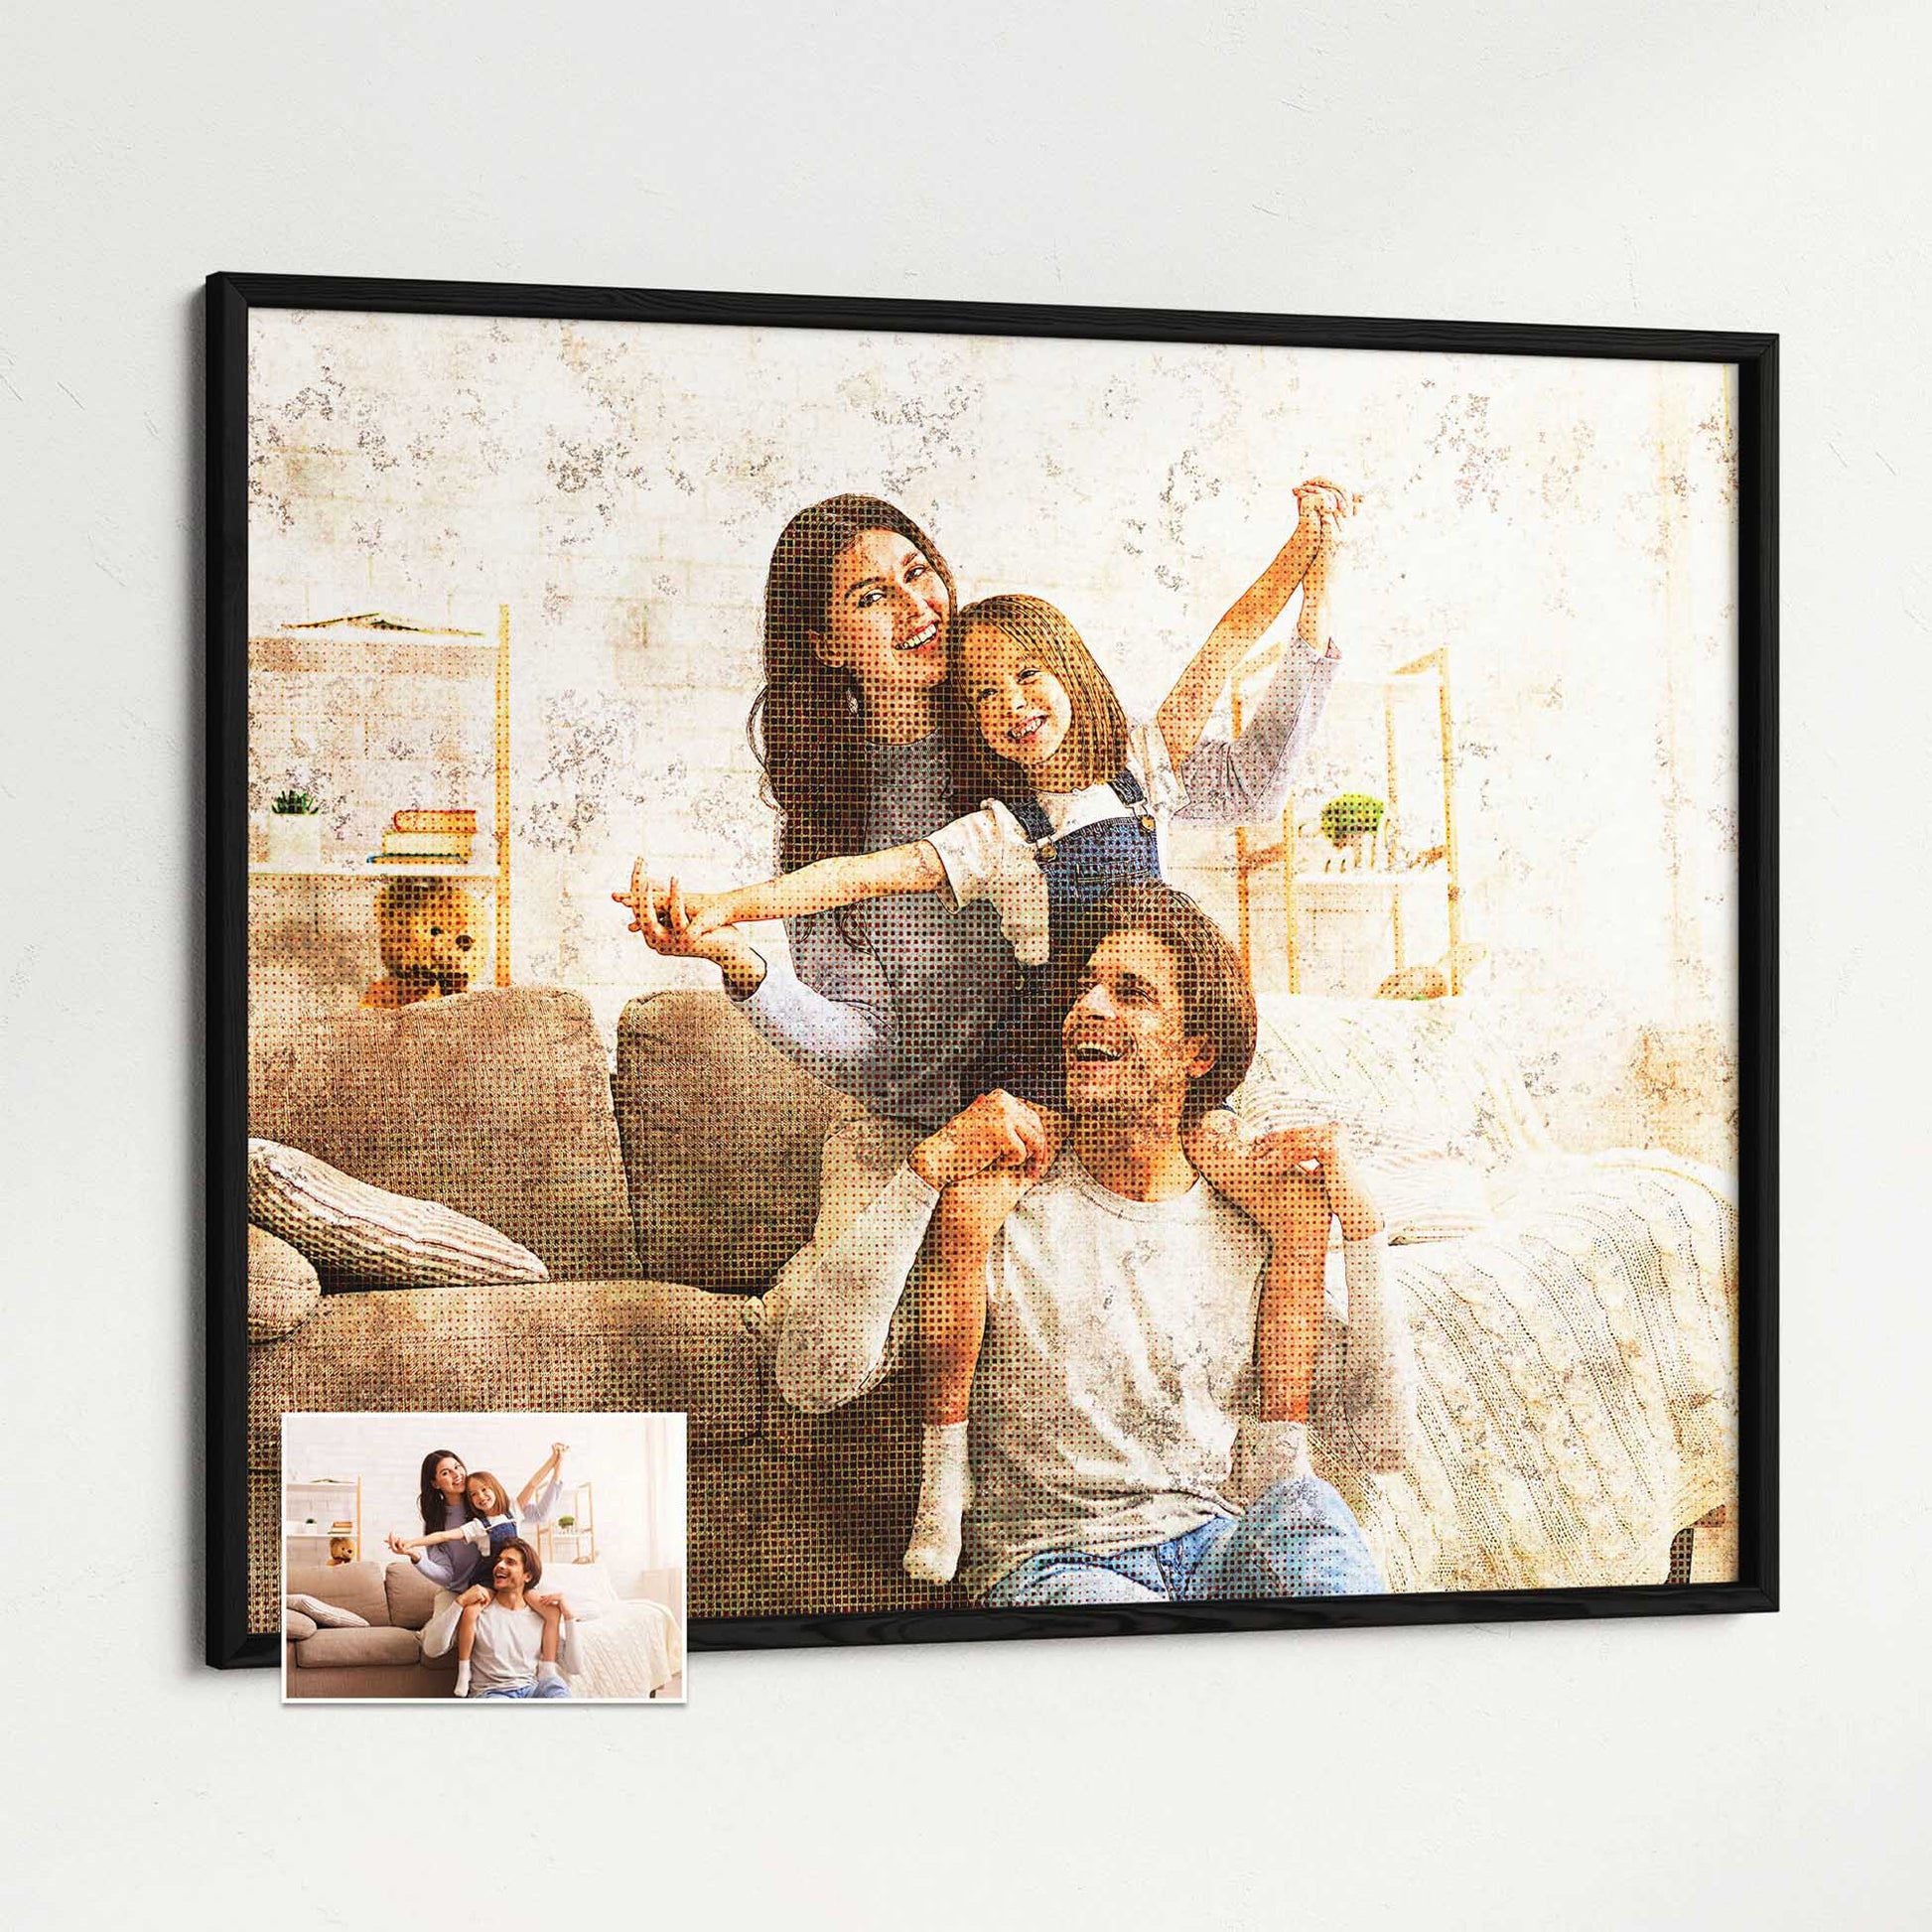 Add a touch of artistic charm to your home decor with the Personalised Grunge FX Framed Print. Created by painting from photo, it showcases a grunge style with a halftone effect, reminiscent of retro, old-school aesthetics